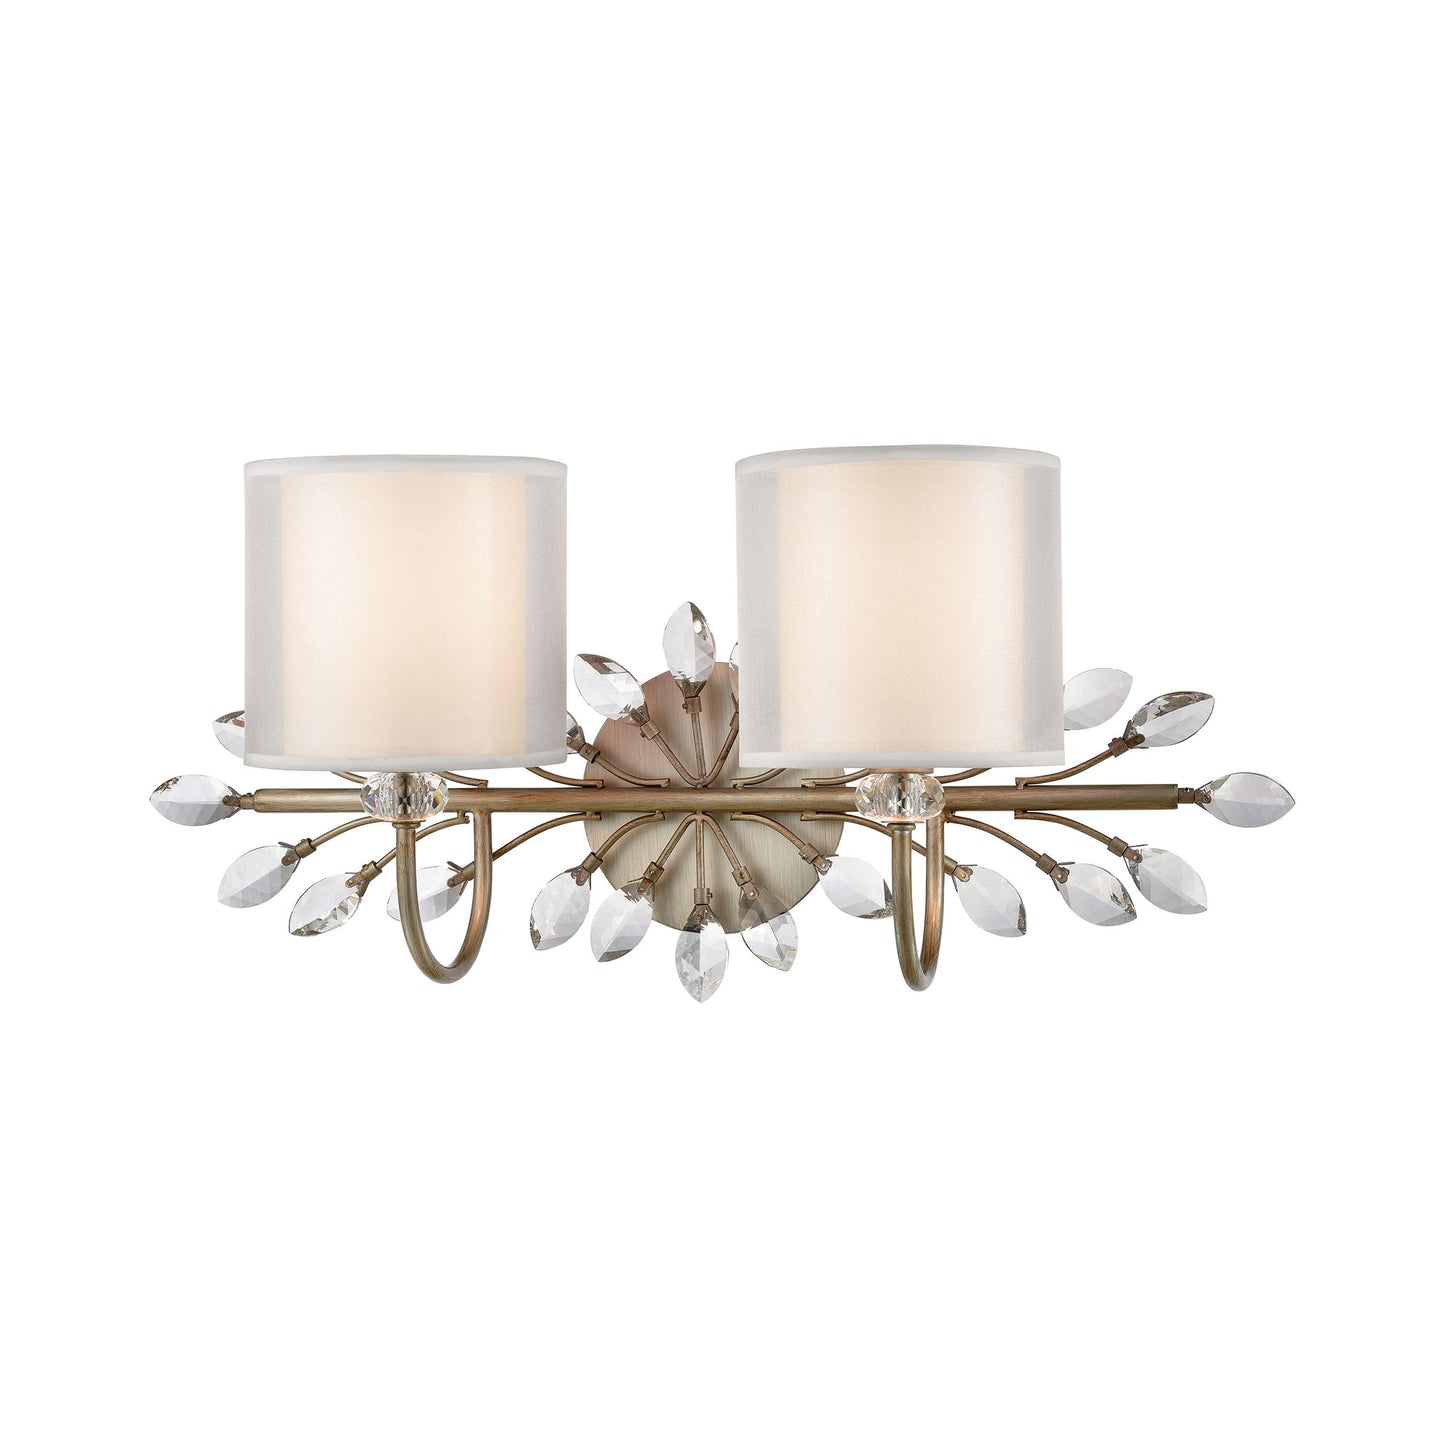 ELK Lighting 16277/2 - Asbury 24" Wide 2-Light Vanity Light in Aged Silver with White Fabric Shade I